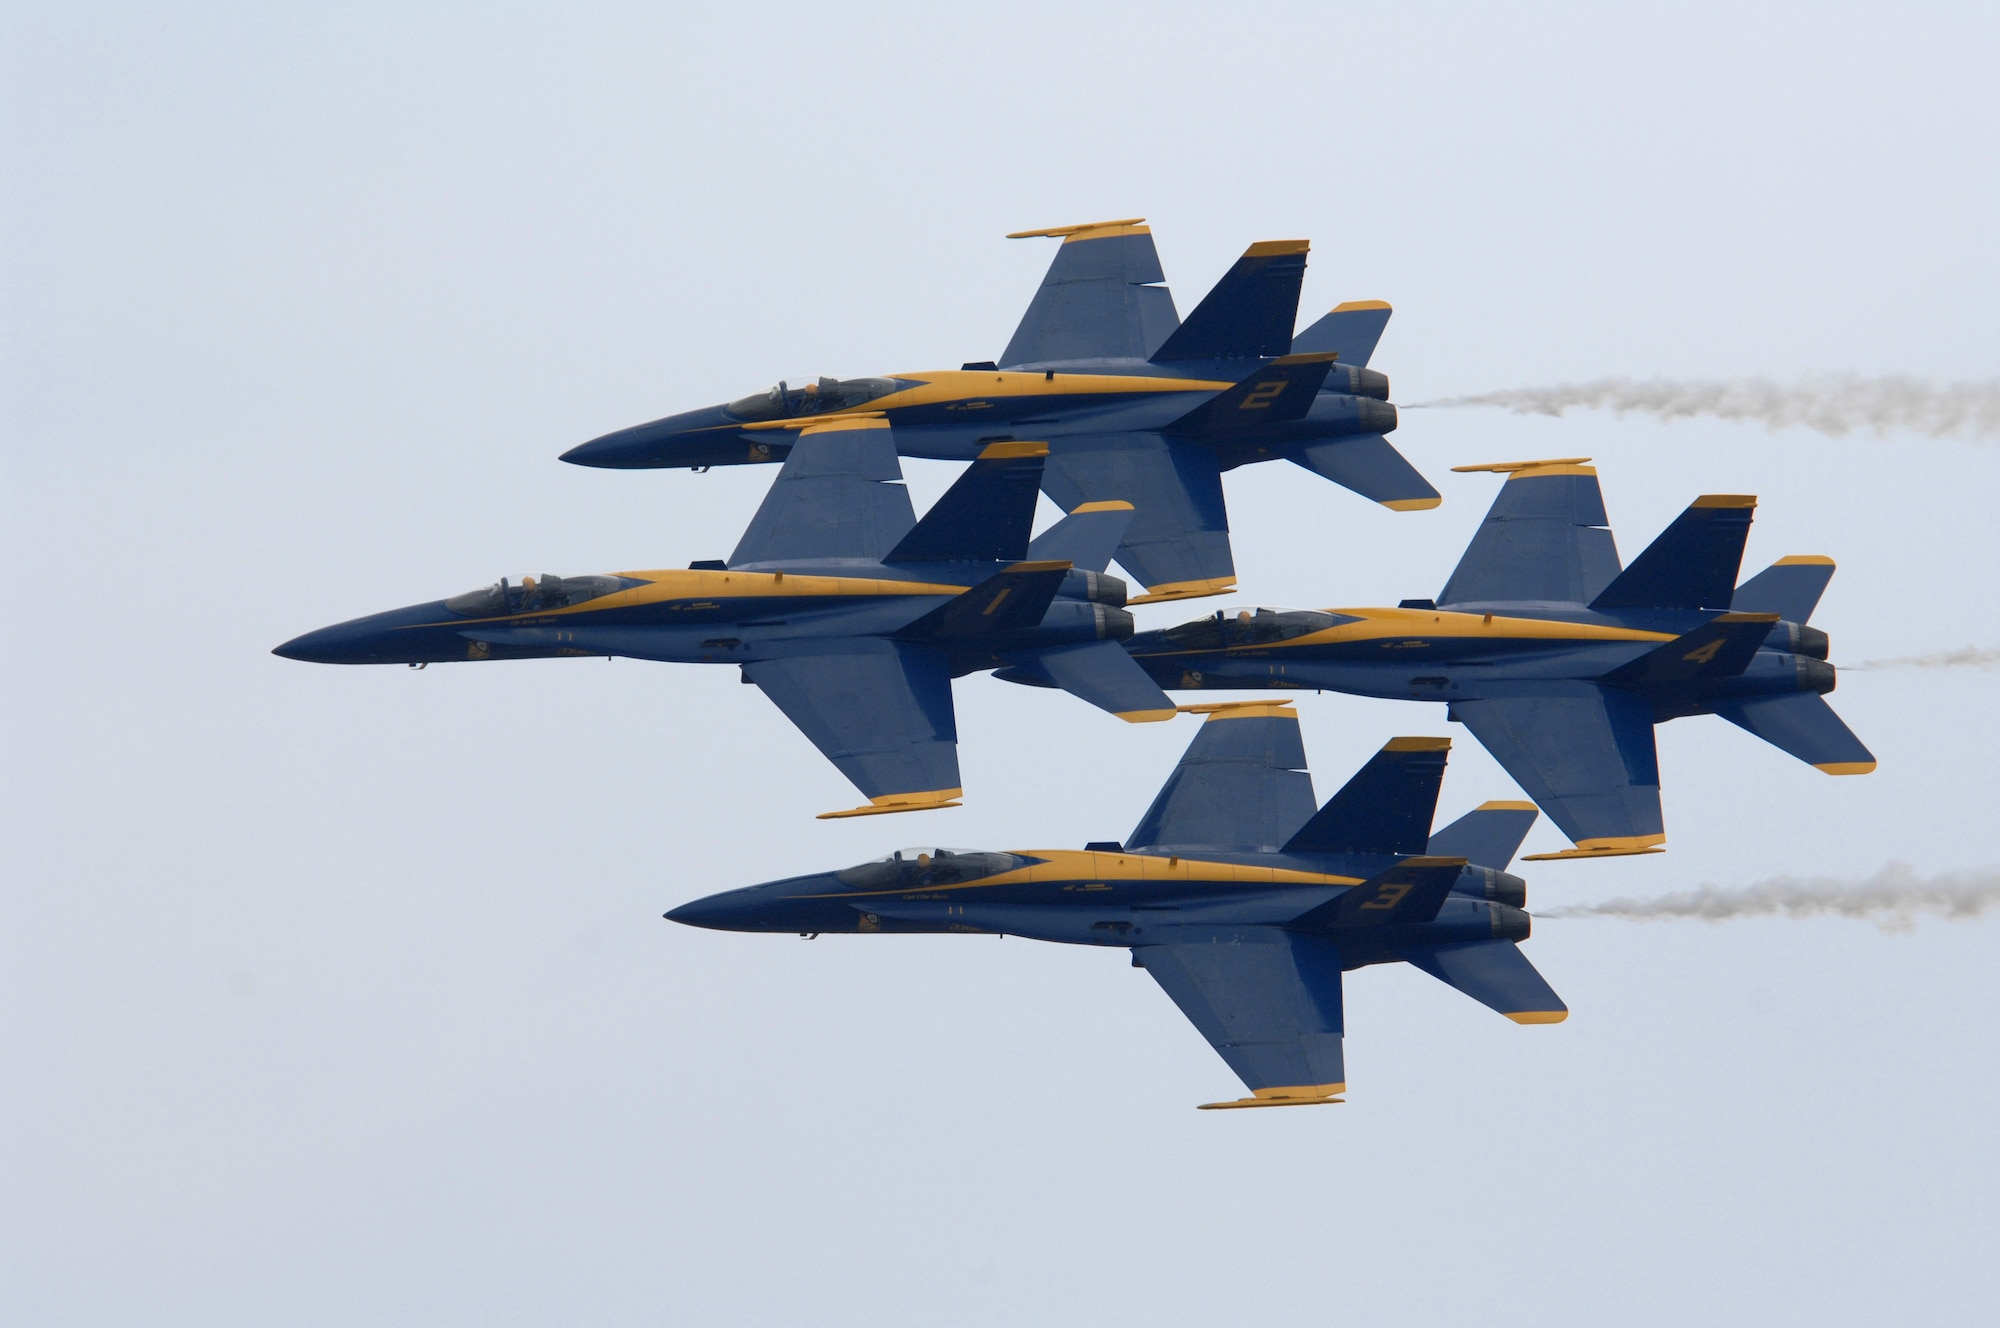 The U.S. Navy Blue Angels fly in a diamond formation at the Wings Over Wayne Airshow here May 12. The Wings Over Wayne Airshow 2007 is the first apperance of the Blue Angels since the accident that occurred April 21.(U.S. Air Force photo by Airman 1st Class Greg Biondo)(released)